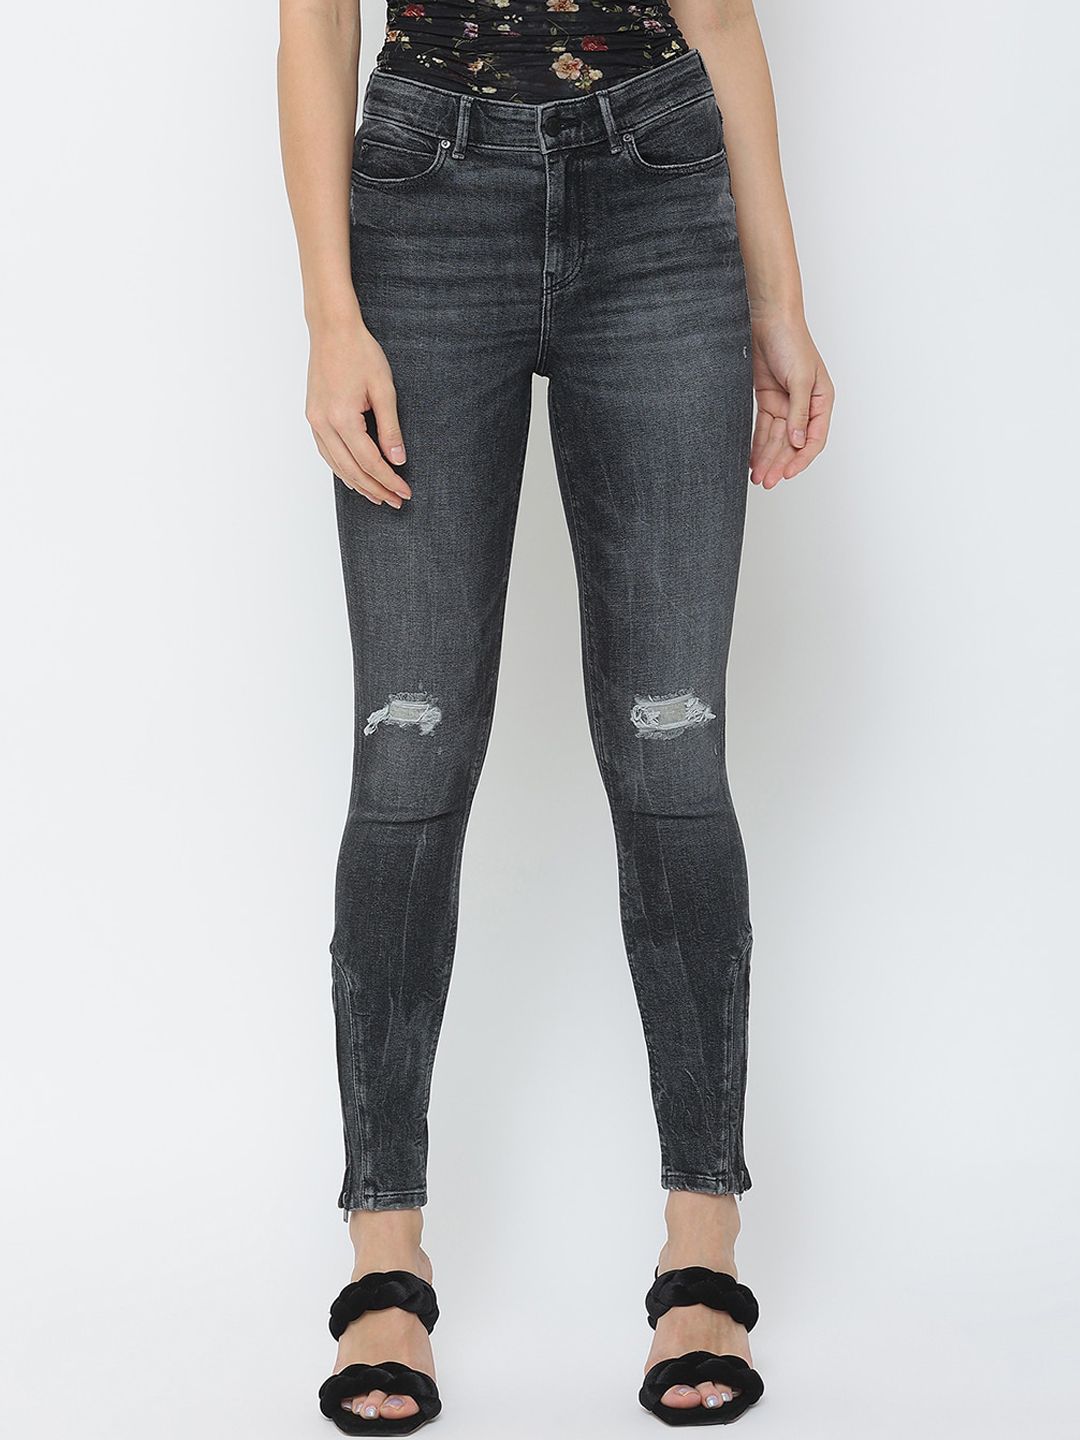 GUESS Women Grey Slim Fit Mildly Distressed Light Fade Jeans Price in India